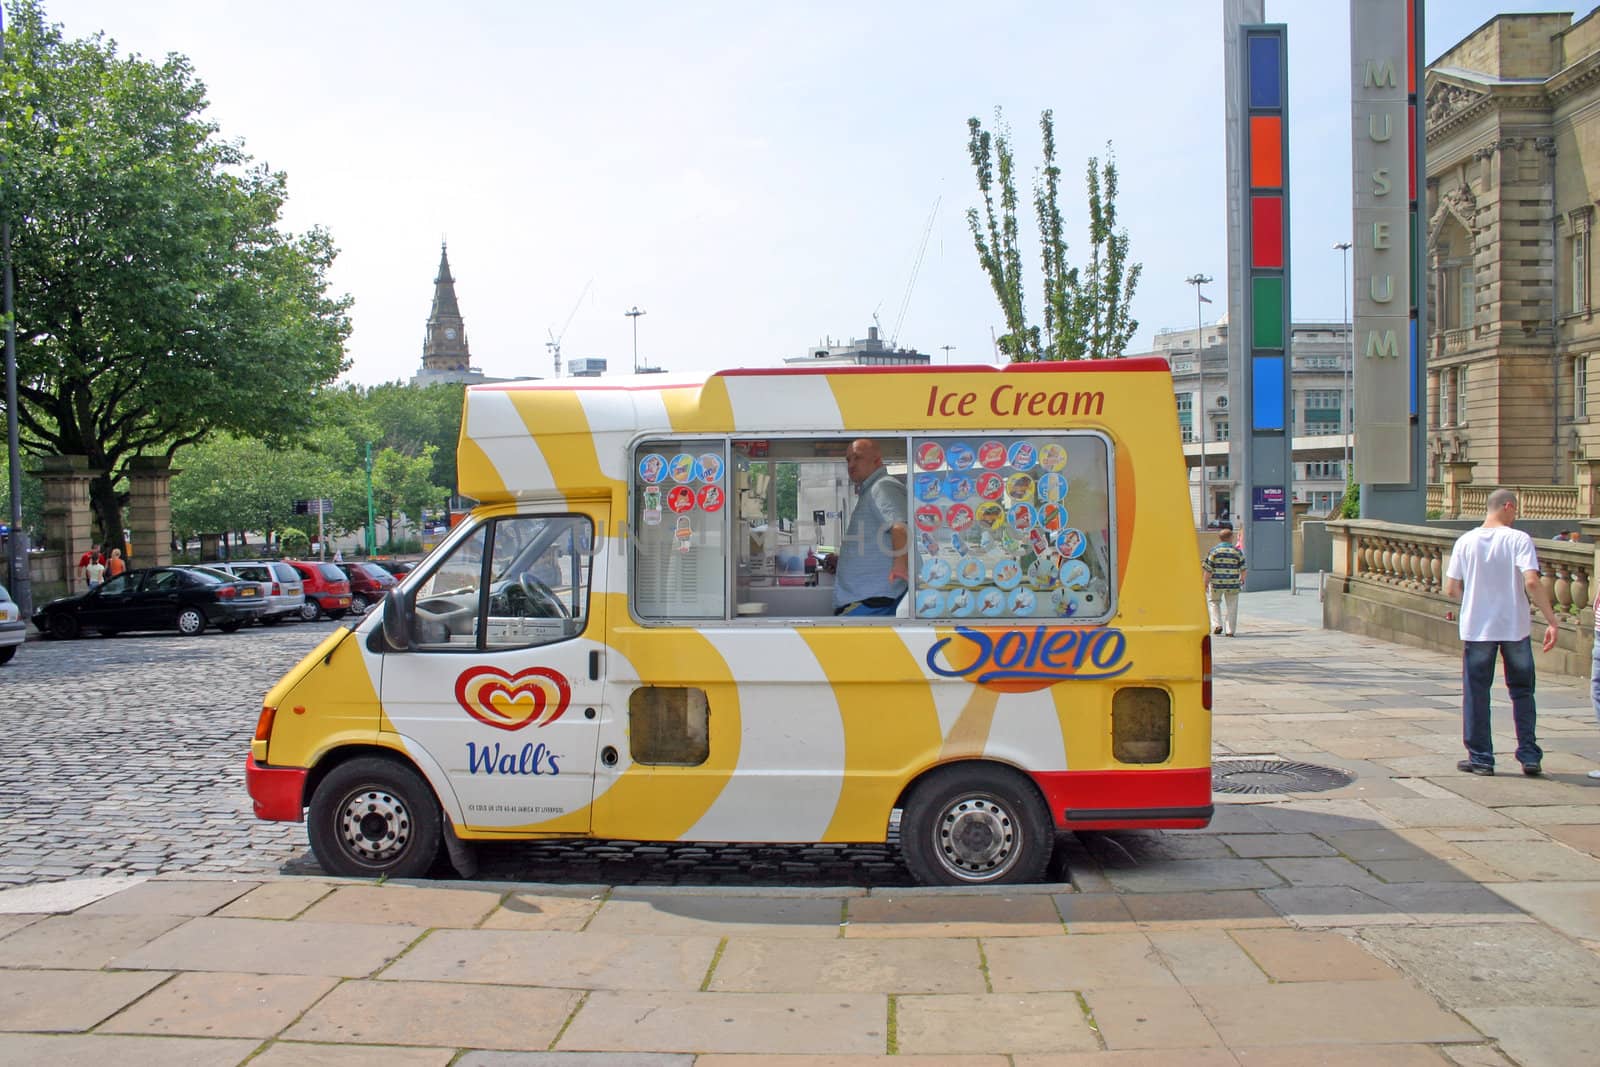 Ice Cream Van Outside Liverpool Museum by green308